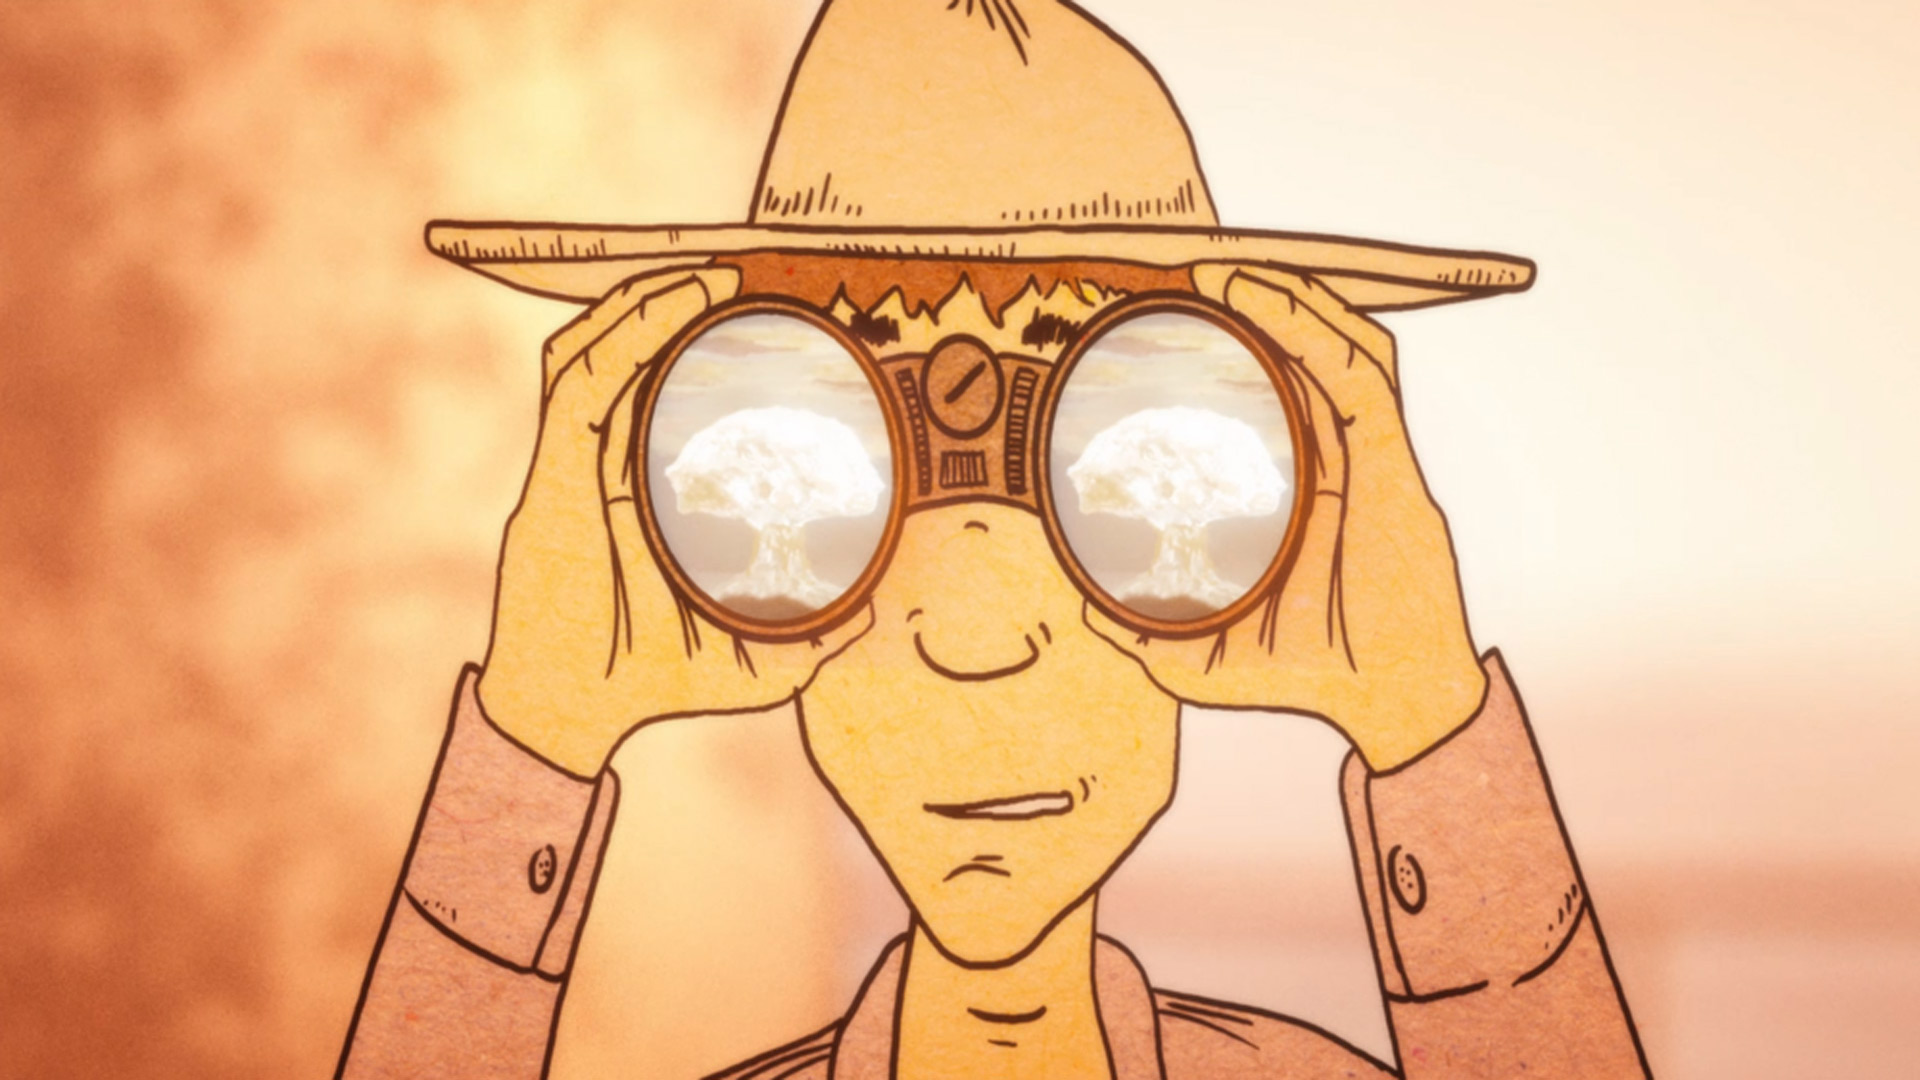 Illustration of a man watching nuclear explosion through binoculars